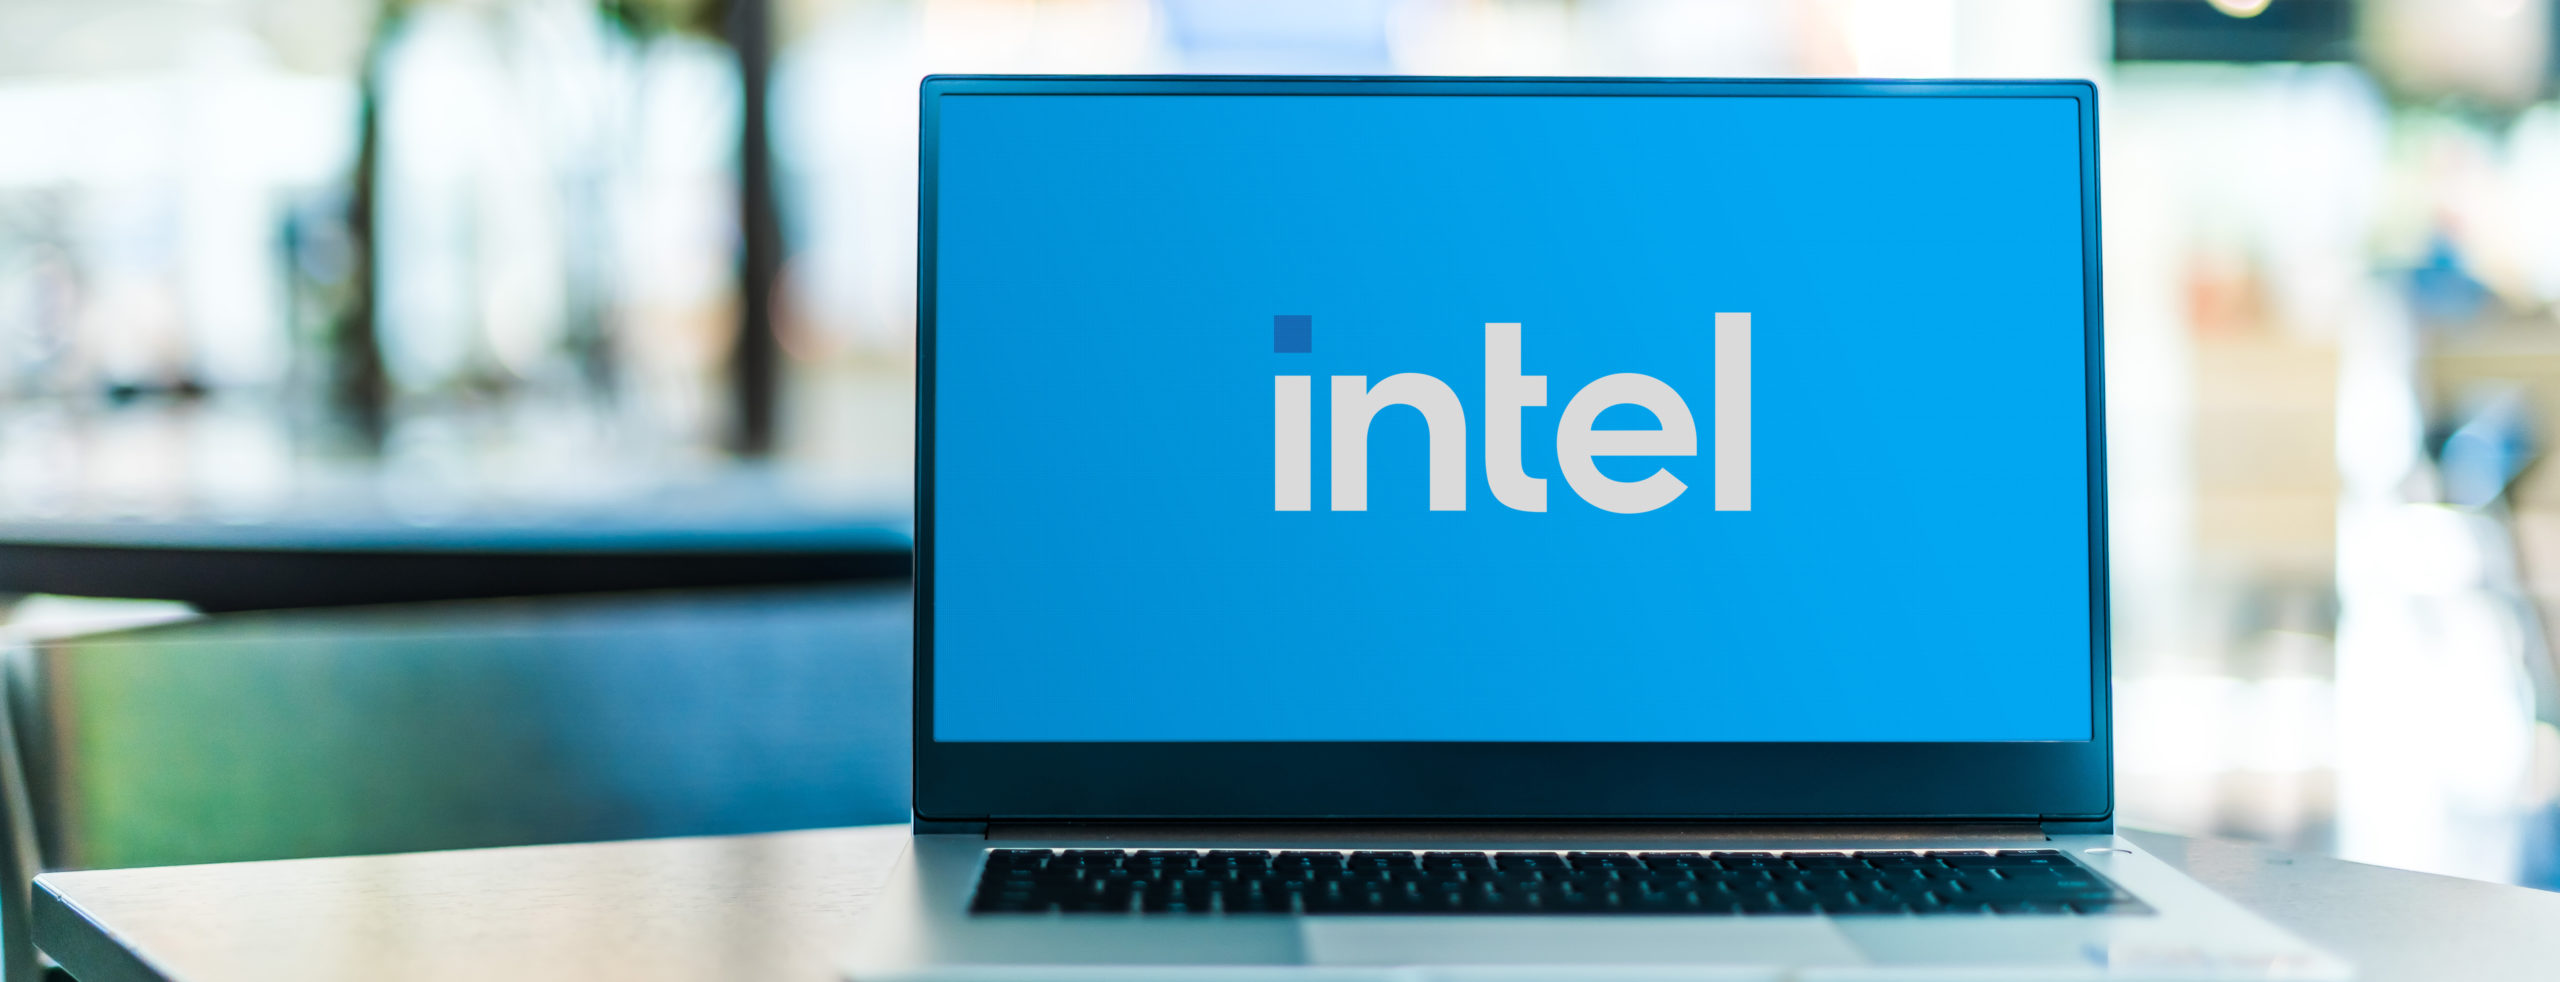 intel-fires-back-at-apple’s-m1-processors-with-benchmarks